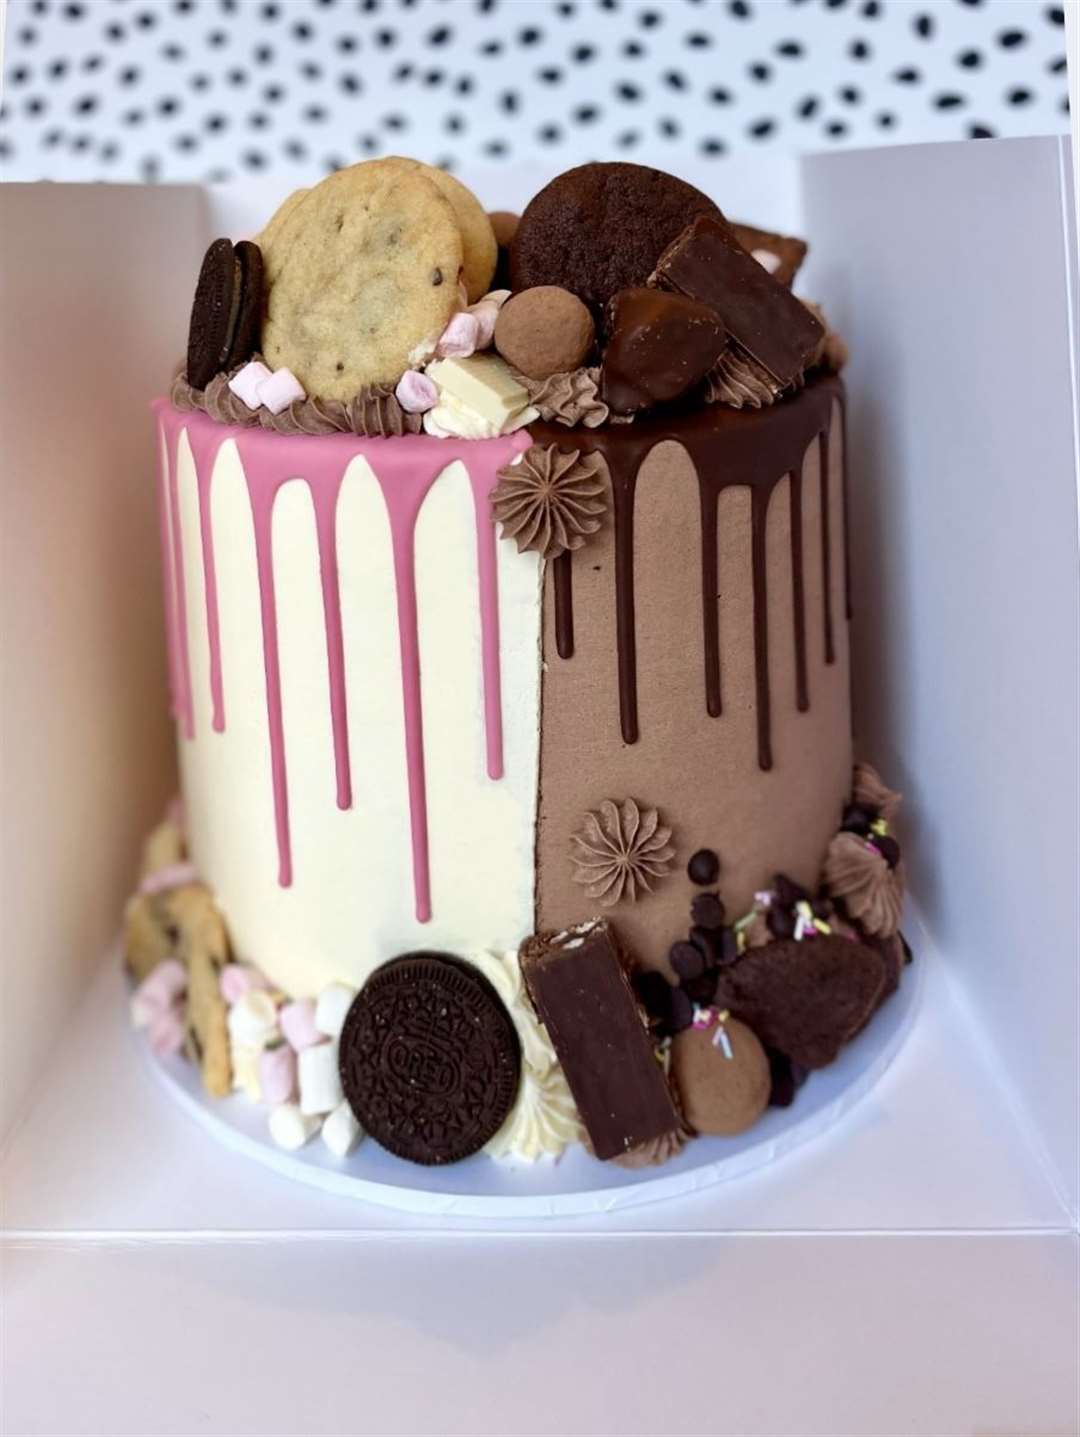 Flo's Vegan Cakes in Maidstone offers a range of cakes, cupcakes and shareboxes